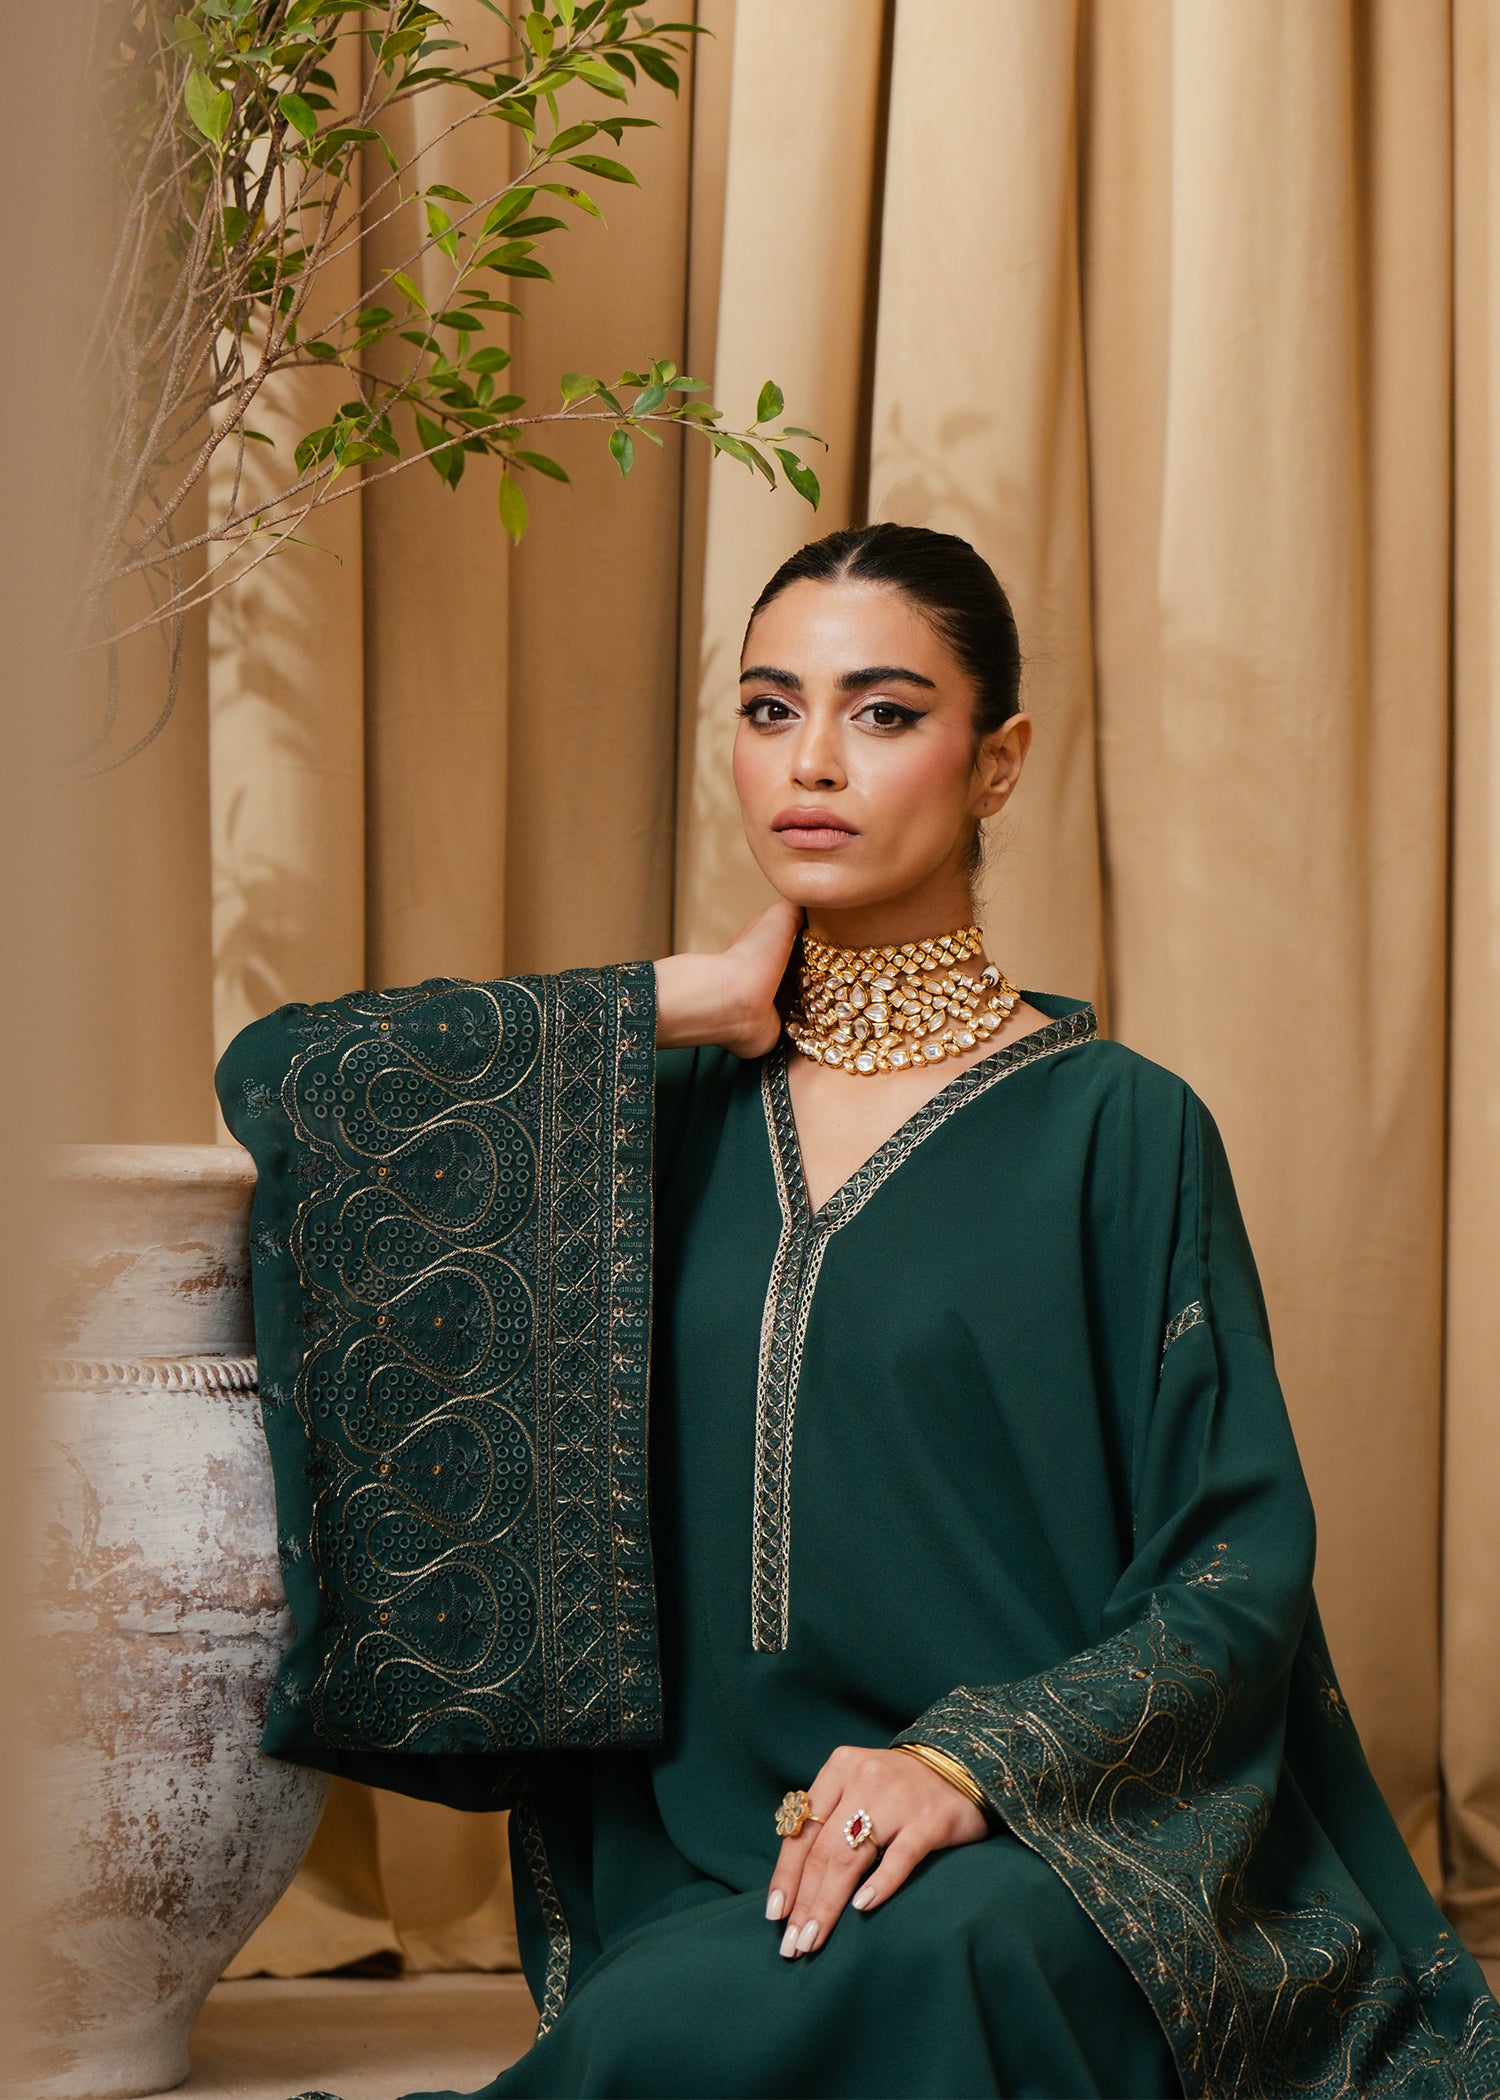 Green Embroidered Suit